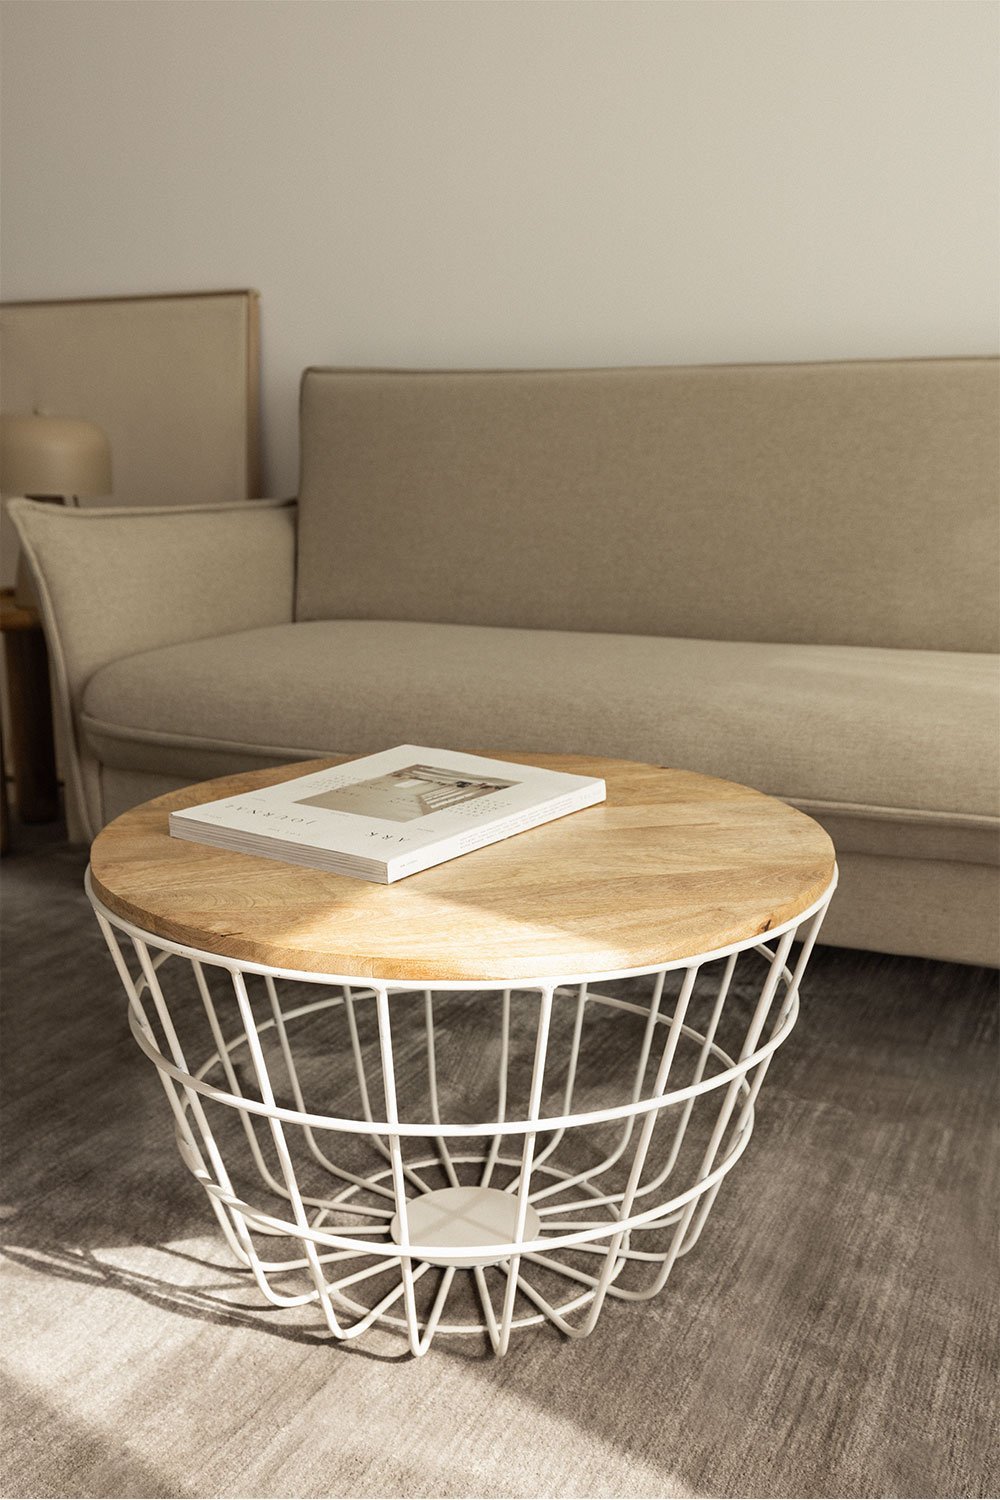 Round coffee table in mango wood and steel (Ø62 cm) Ket, gallery image 1